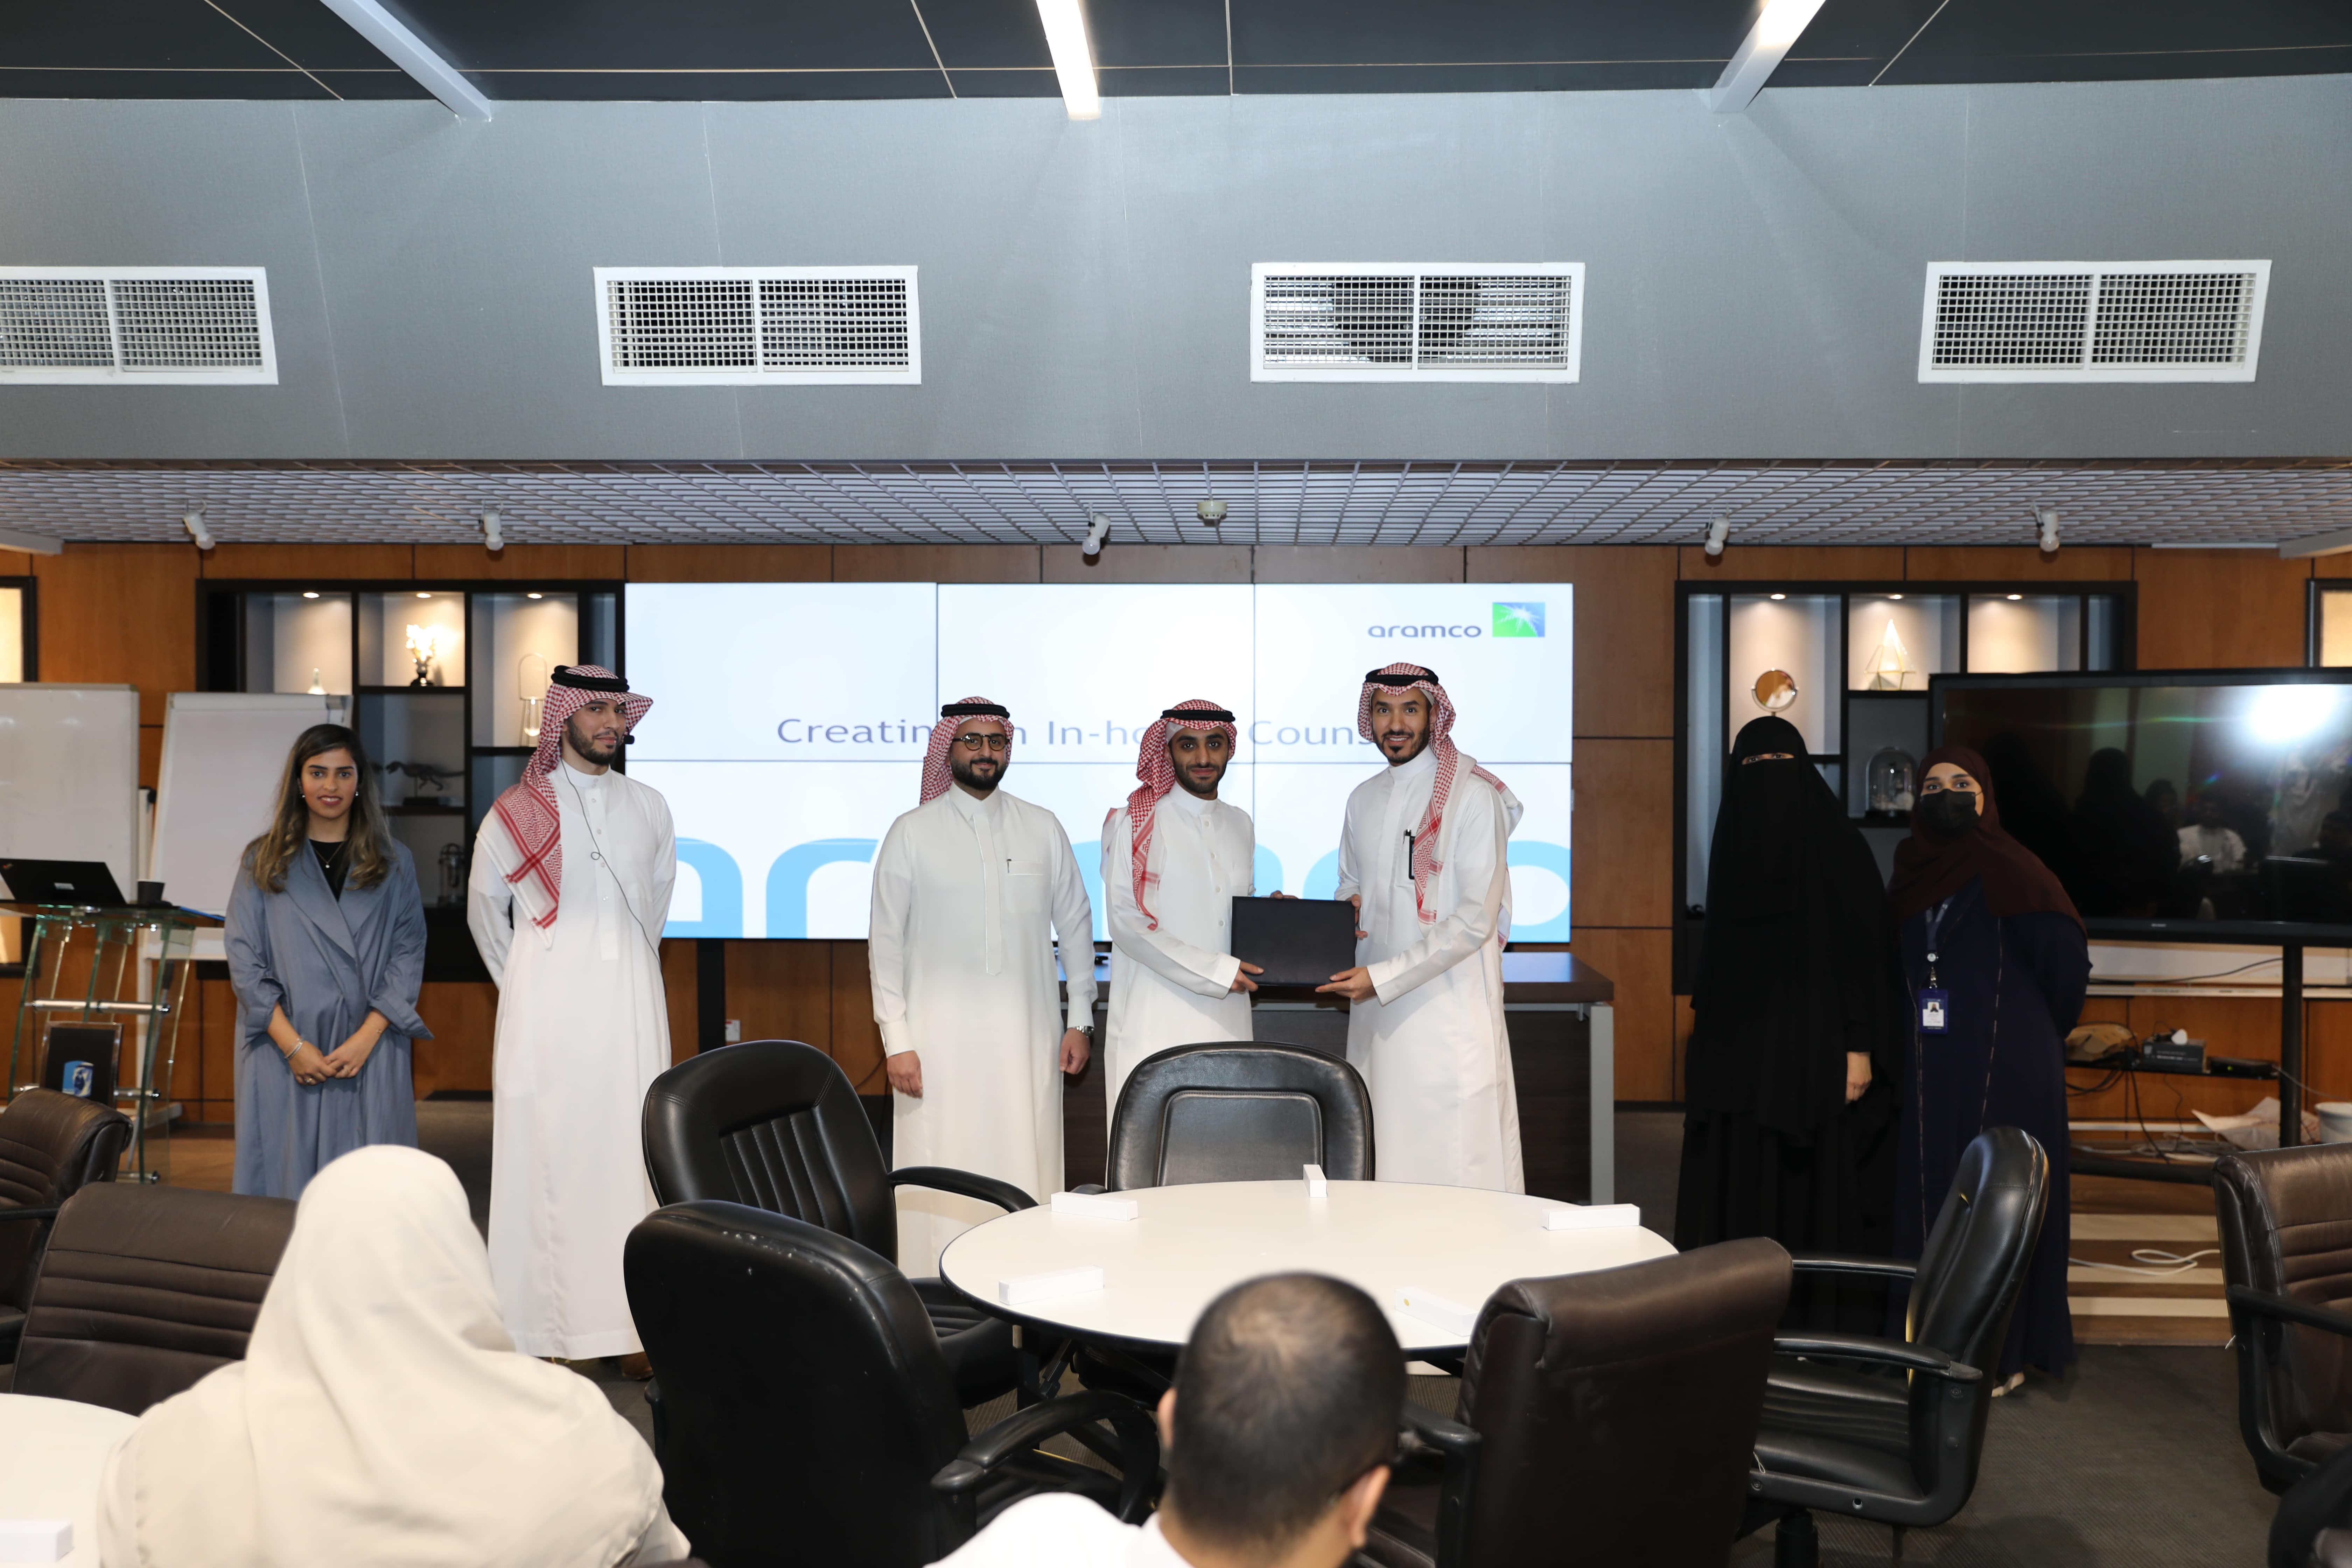 A Workshop Entitled "Creating an In-house Counsel" in Cooperation with Aramco